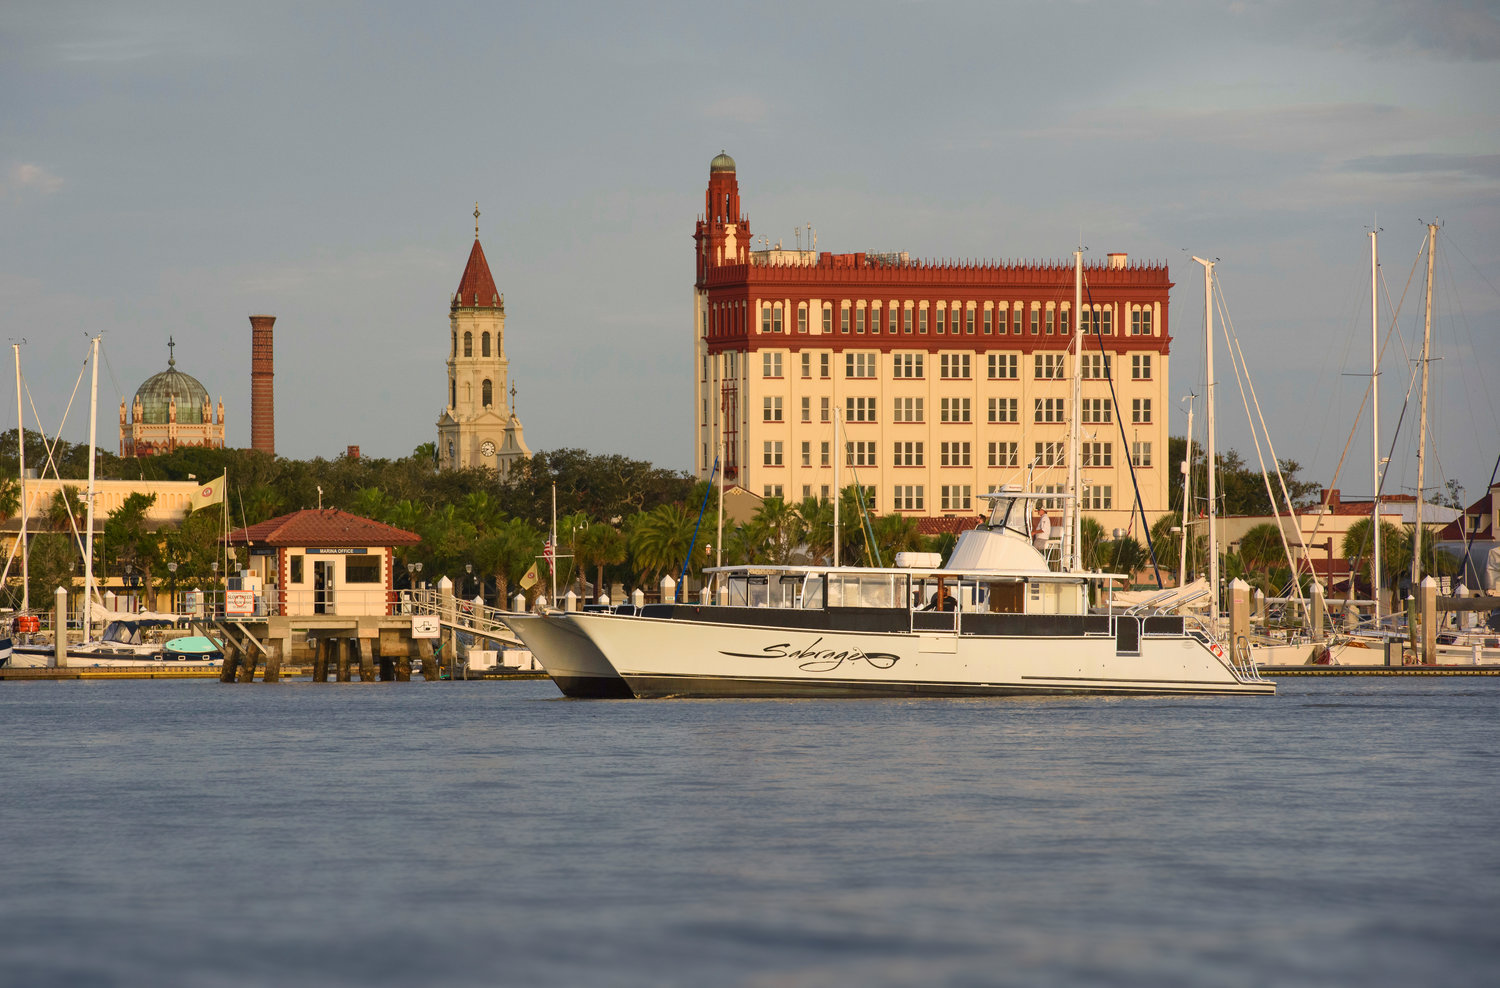 Sabrage is seen on St. Augustine’s bayfront, with the city in the background.